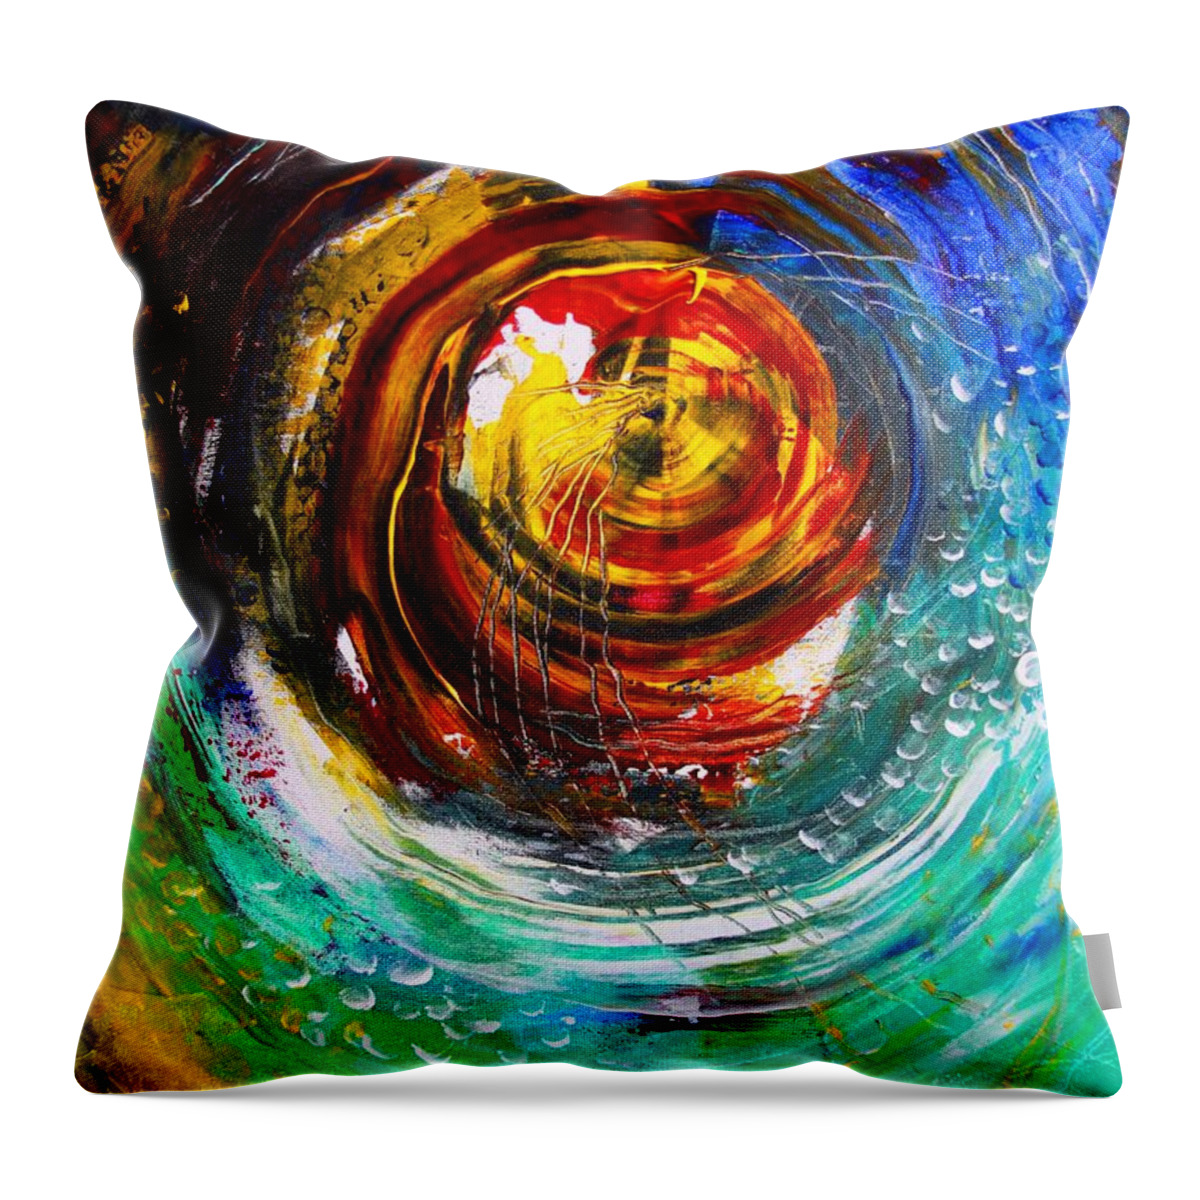 Abstract Throw Pillow featuring the painting Necessary Anchor by J Vincent Scarpace